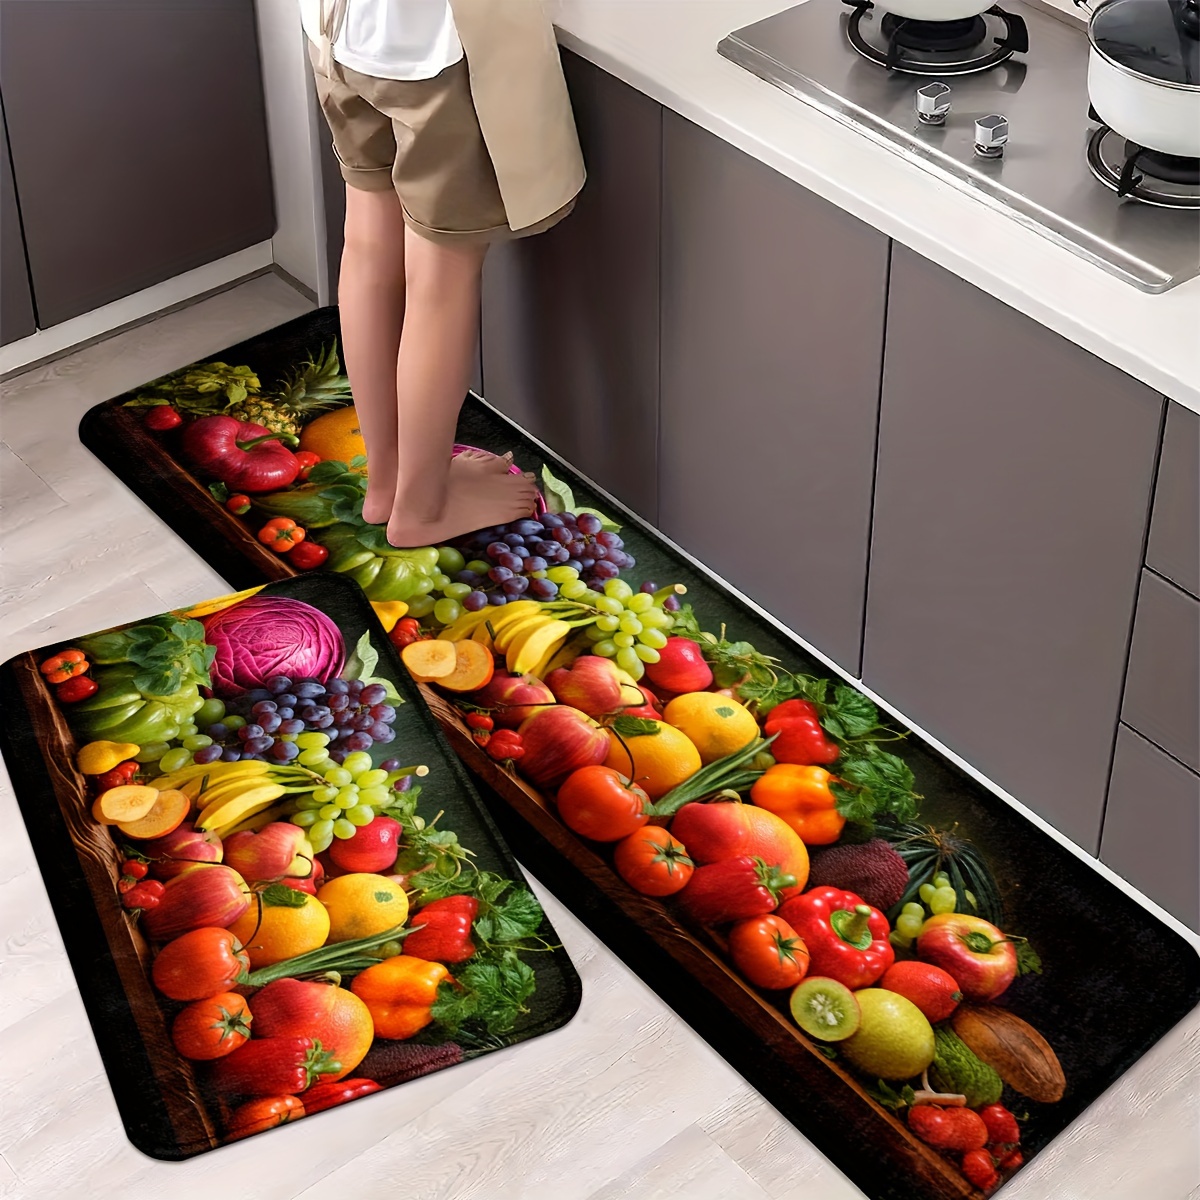 

1pc/2pcs, Fruits Kitchen Mats, 1.2cm Thickness Non-slip And Durable Bathroom Pads, Comfortable Standing Runner Rugs, Carpets For Kitchen, Home, Office, Sink, Laundry Room, Bathroom, Spring Decor